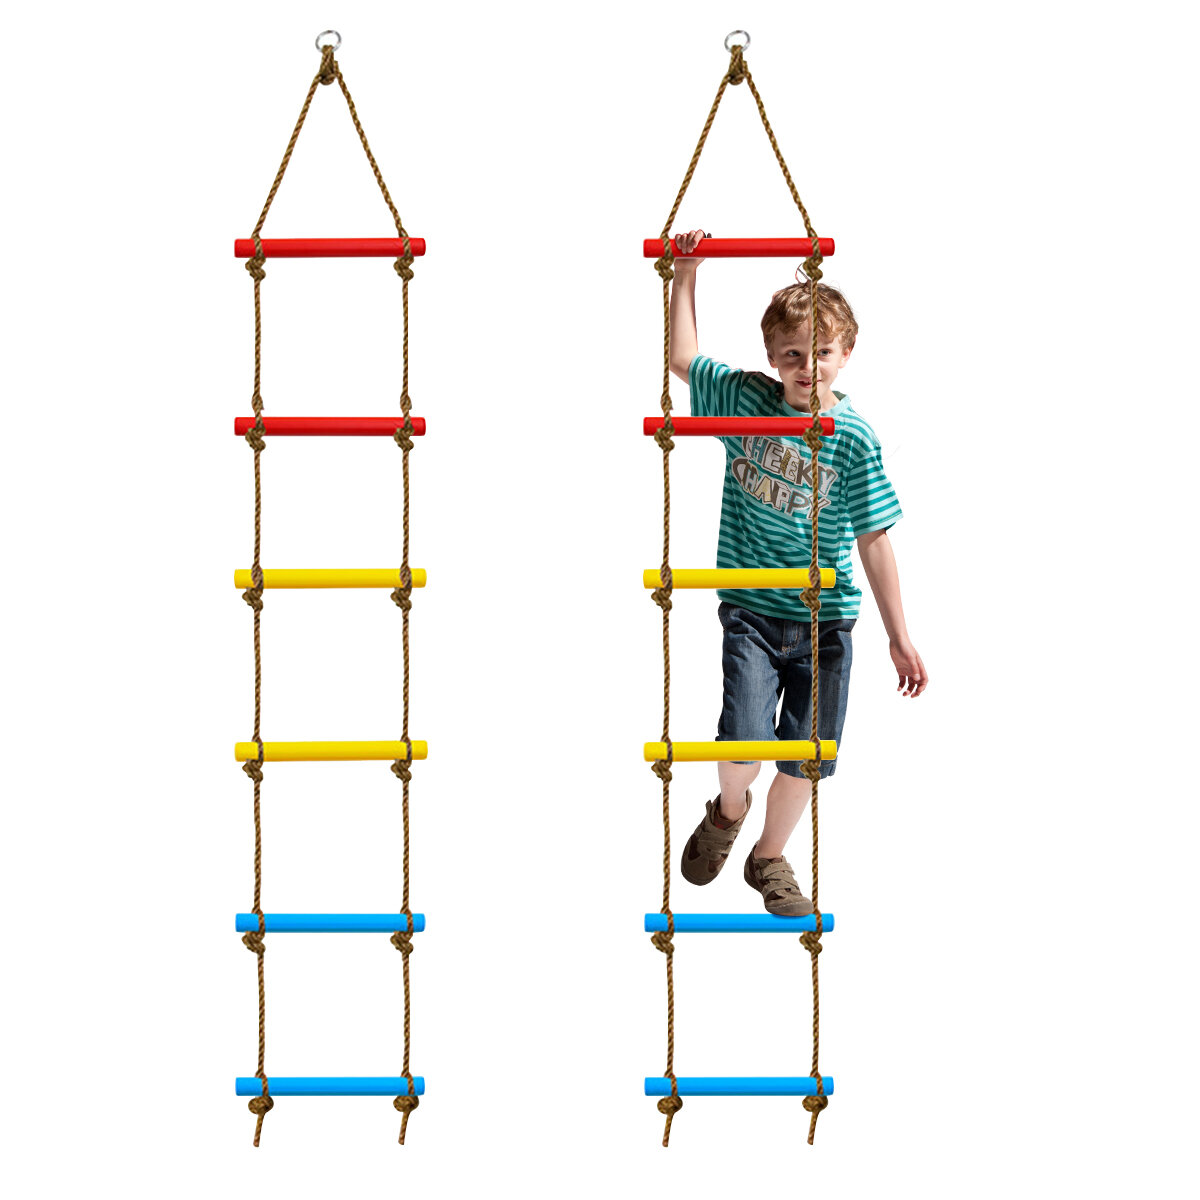 6-Rung Colorful Swing Ladder Children Climbing Rope Ladder Toys Outdoor Leisure Physical Fitness Training Climbing Ladde